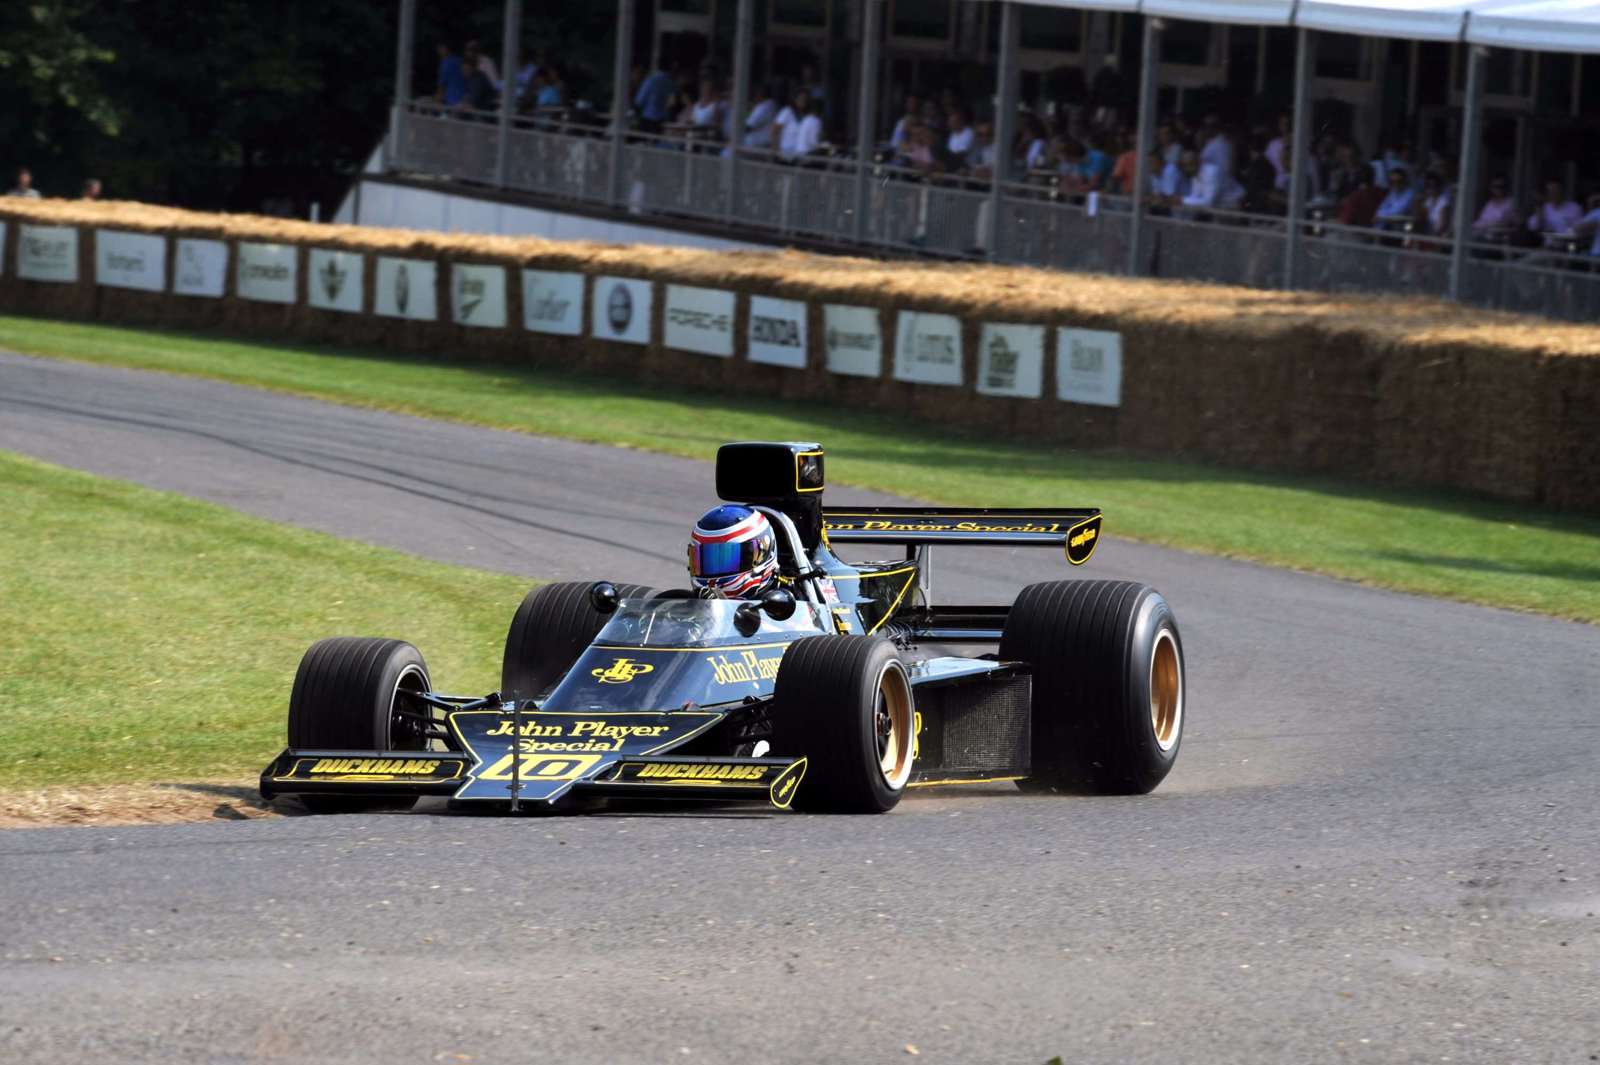 Andrew Frankel Was the 76 Lotus worst F1 car 